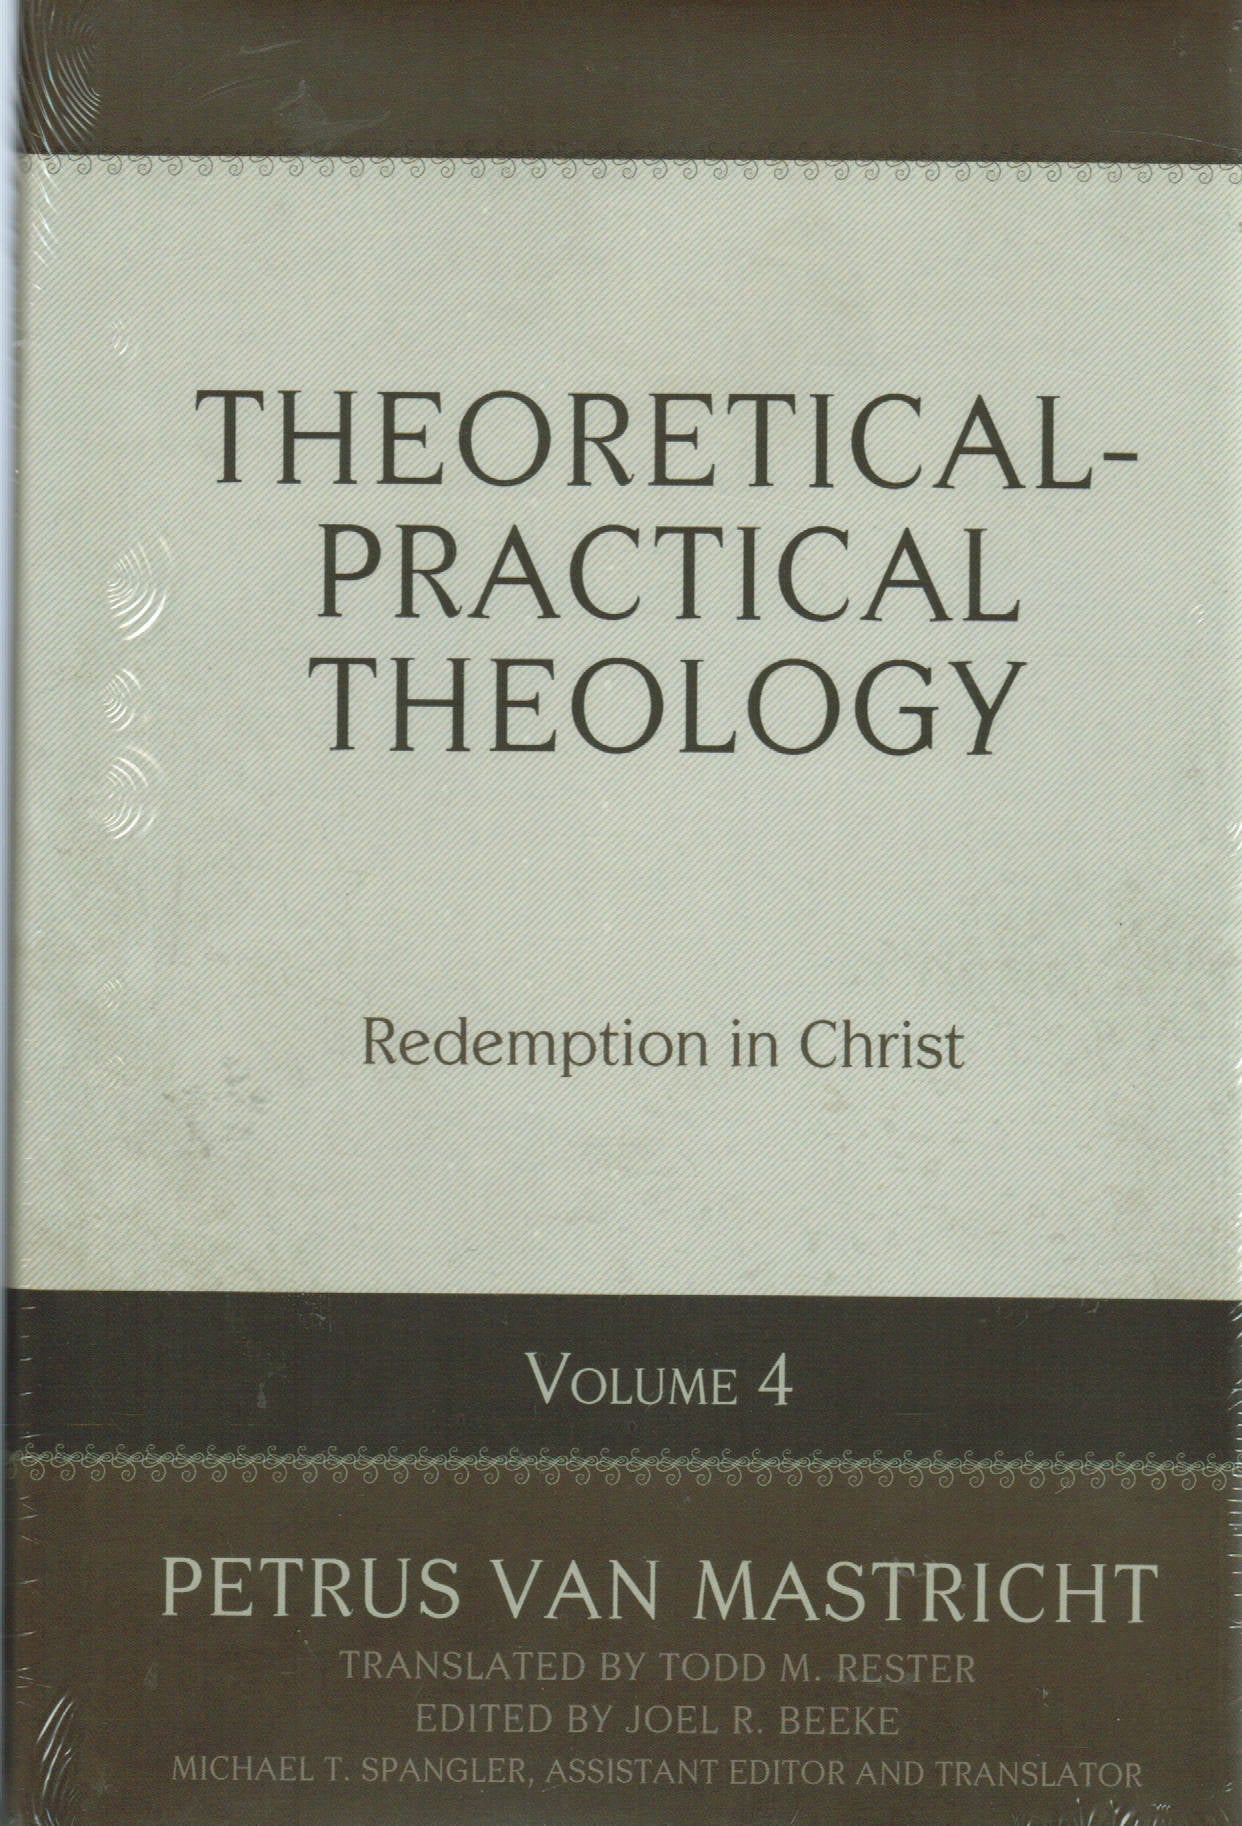 Theoretical-Practical Theology - Volume 4: Redemption in Christ